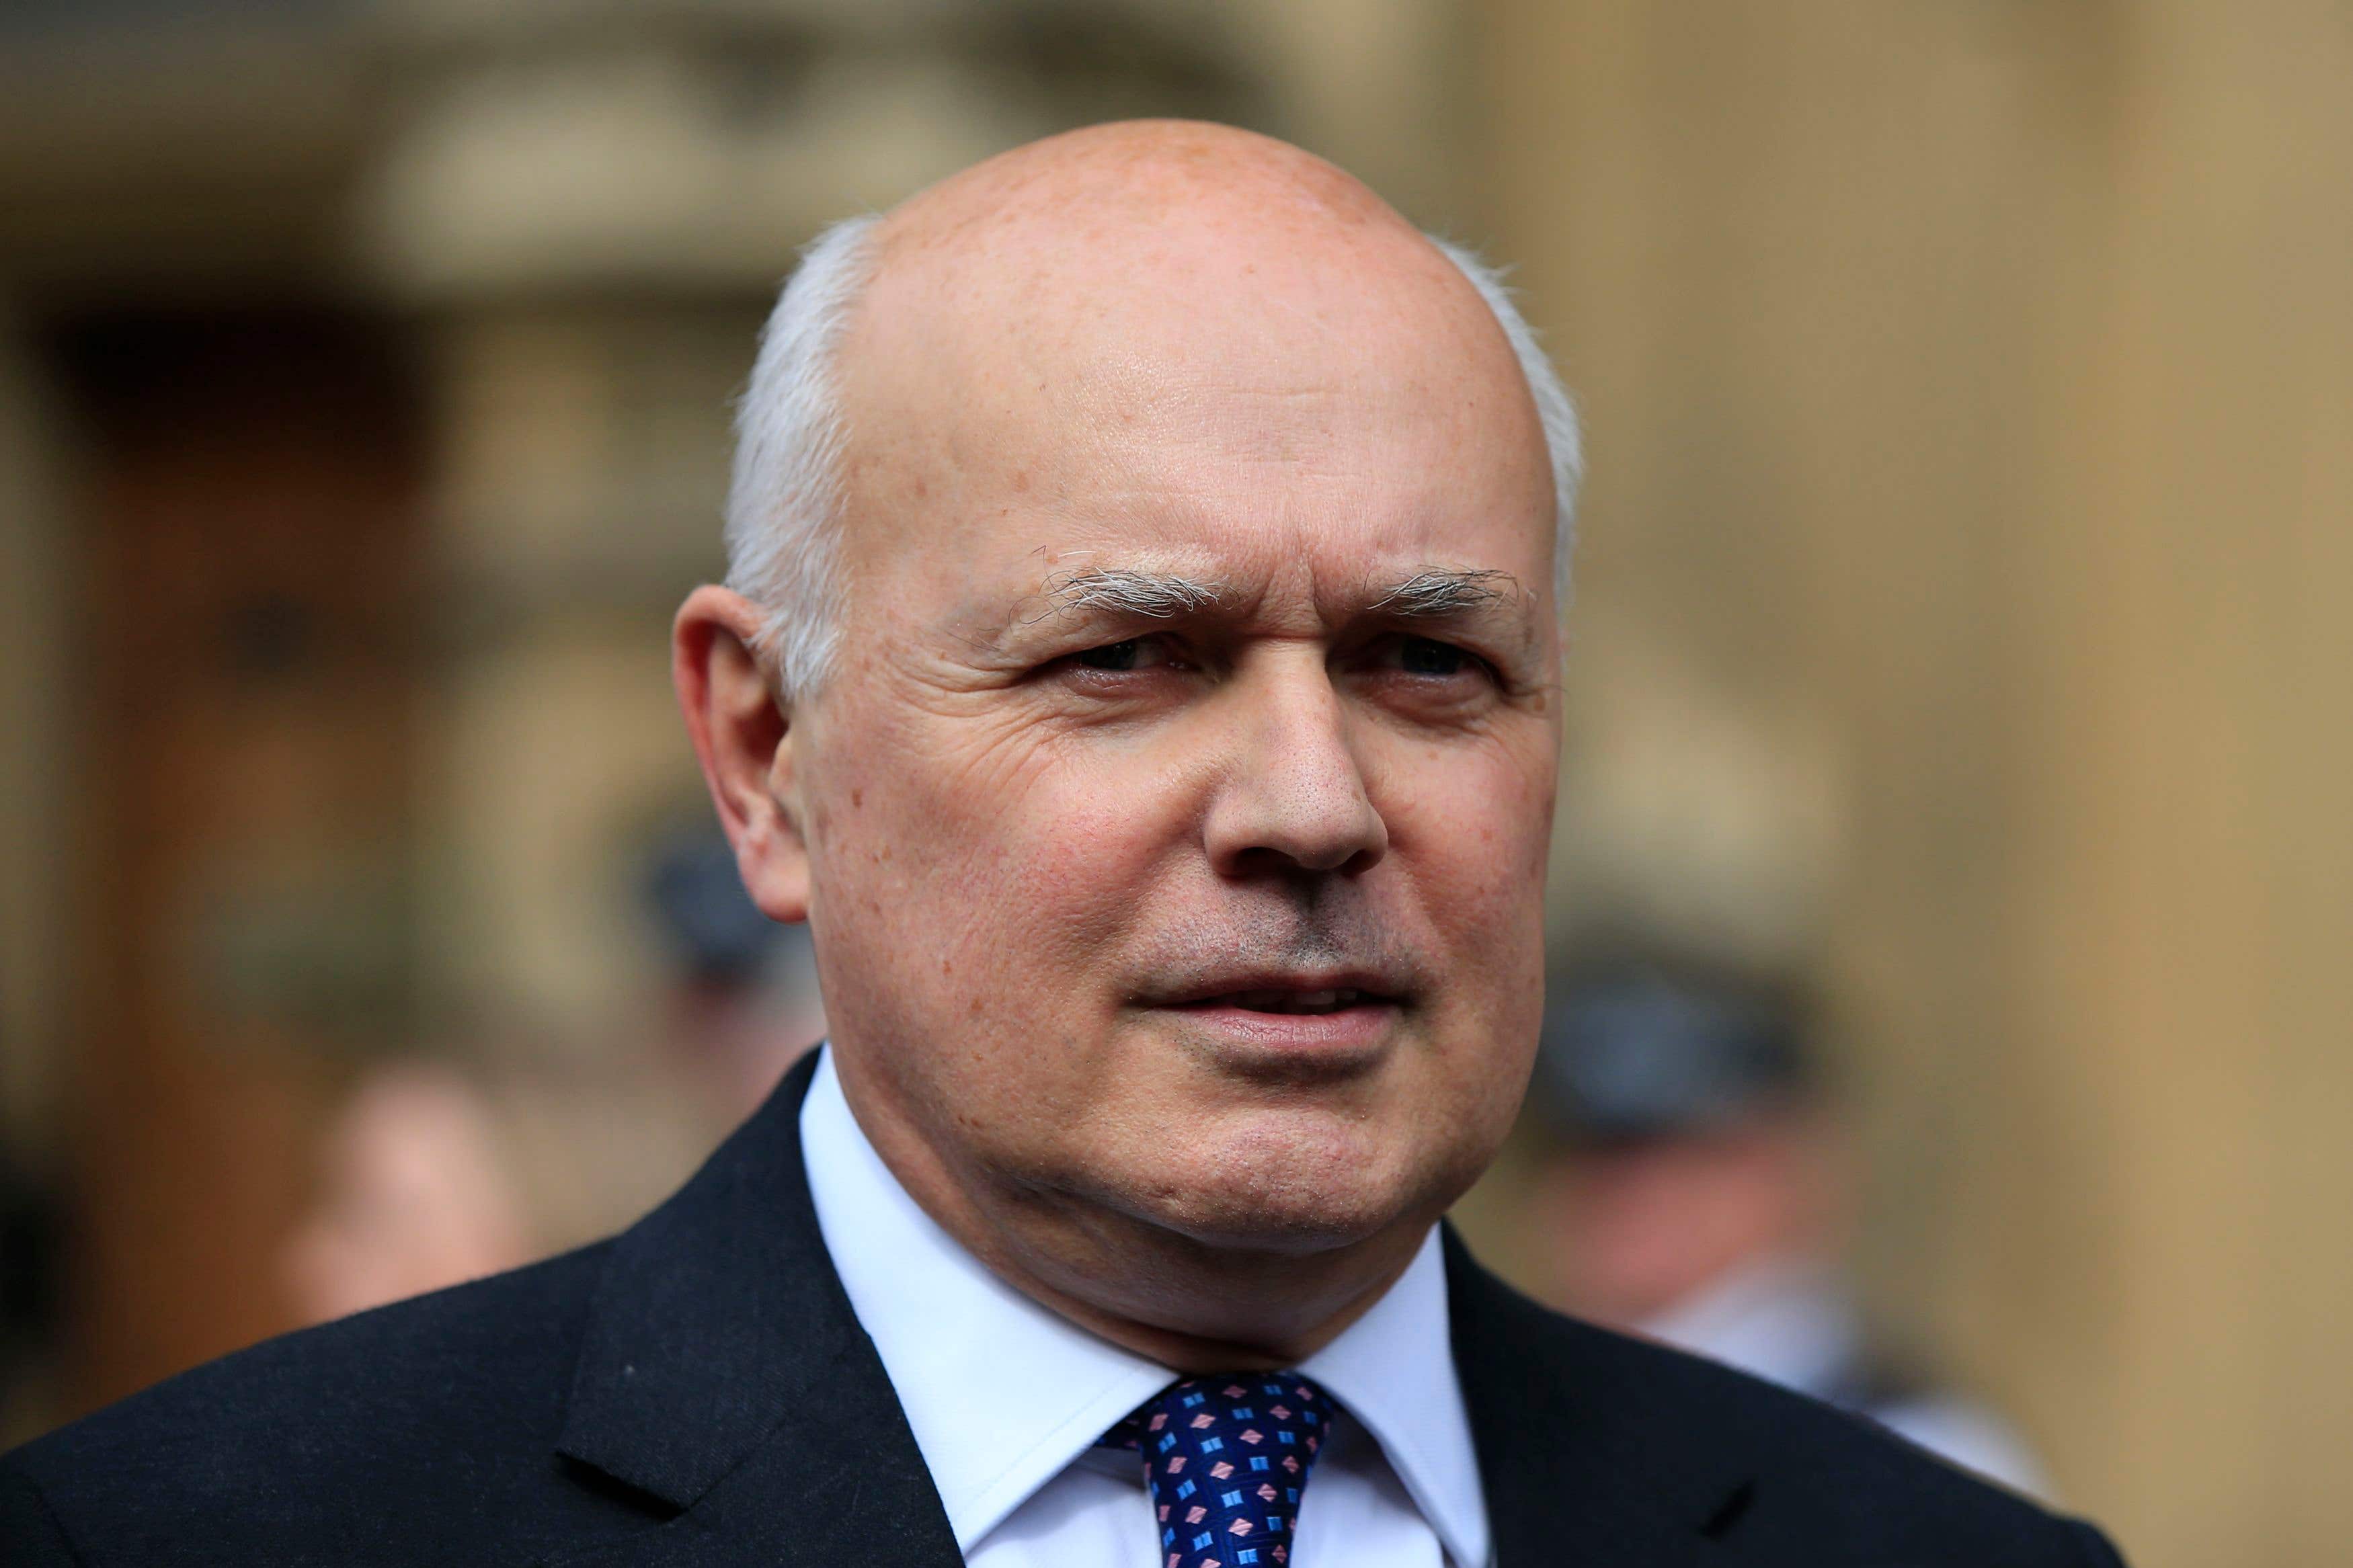 Sir Iain Duncan Smith said the Afghan pilot is ‘welcome’ in the UK